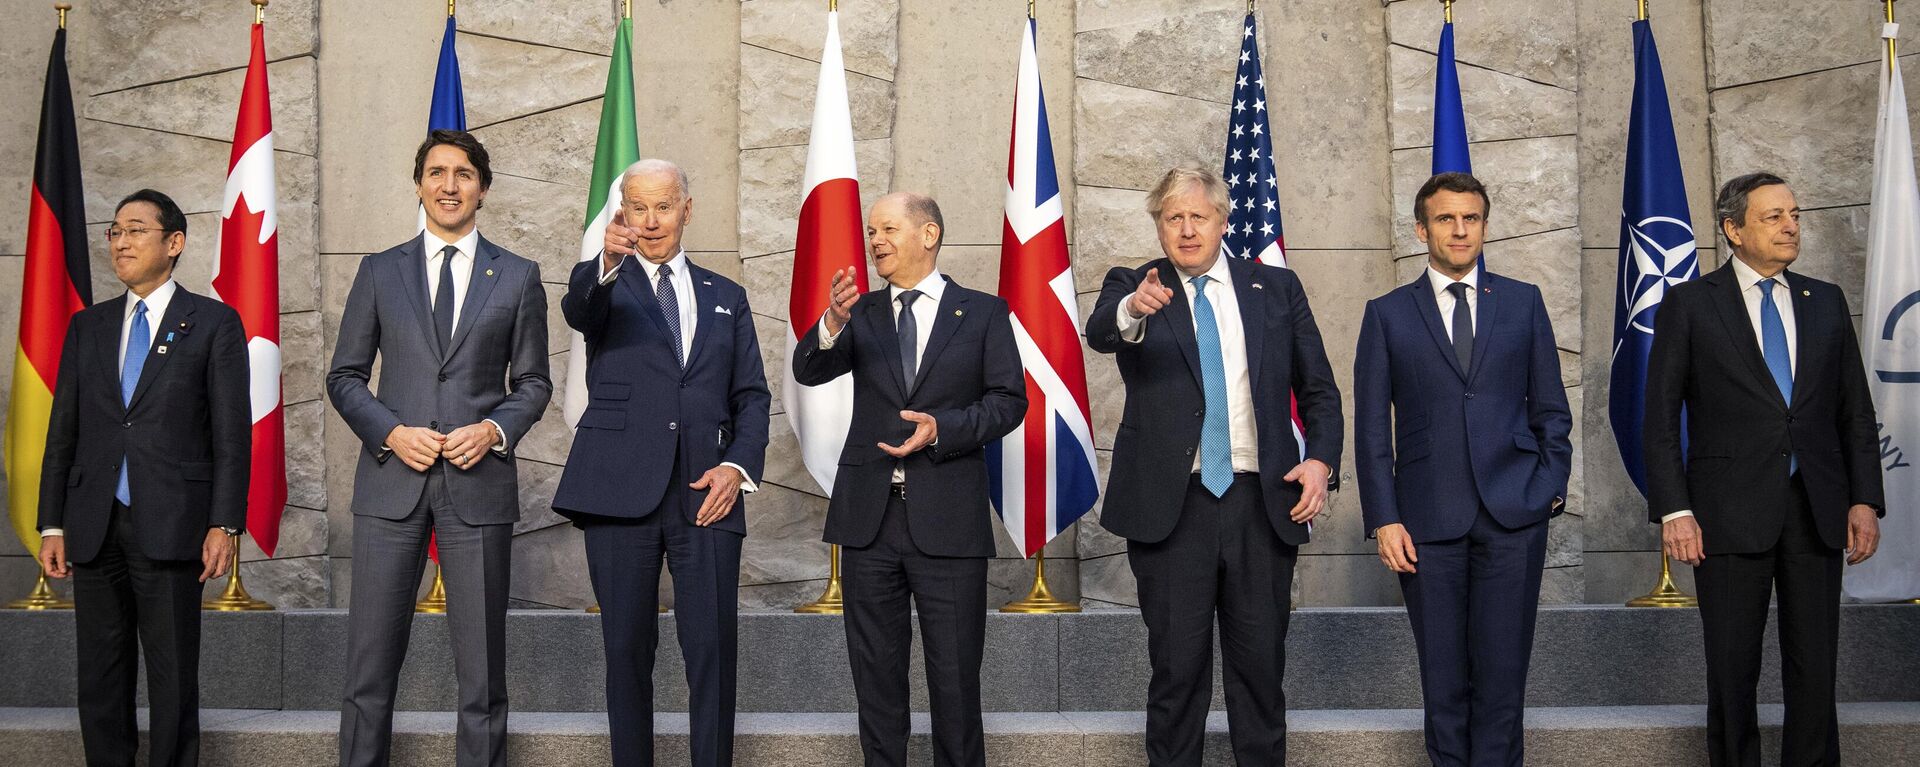 From left, Japan's Prime Minister Fumio Kishida, Canadian Prime Minister Justin Trudeau, U.S. President Joe Biden, German Chancellor Olaf Scholz, British Prime Minister Boris Johnson, French President Emmanuel Macron and Italian Prime Minister Mario Draghi pose for a group photo during an extraordinary NATO summit at NATO headquarters in Brussels, Belgium, Thursday, March 24, 2022. - Sputnik International, 1920, 31.03.2022